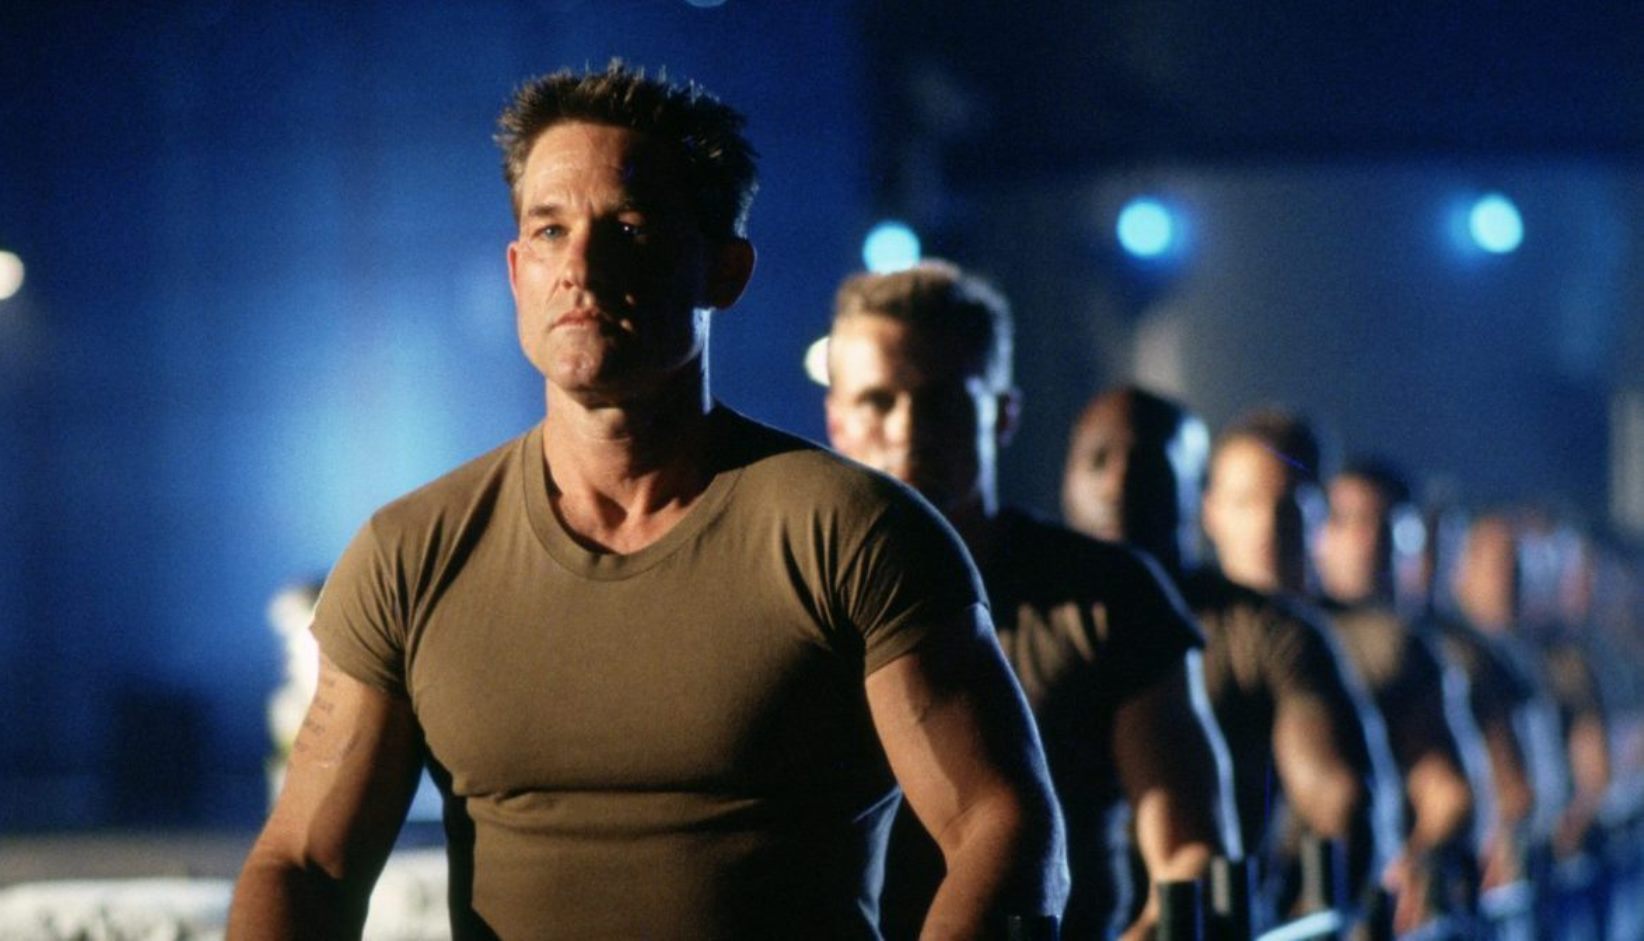 Kurt Russell (front) as the programmed soldier Todd in Soldier (1998)